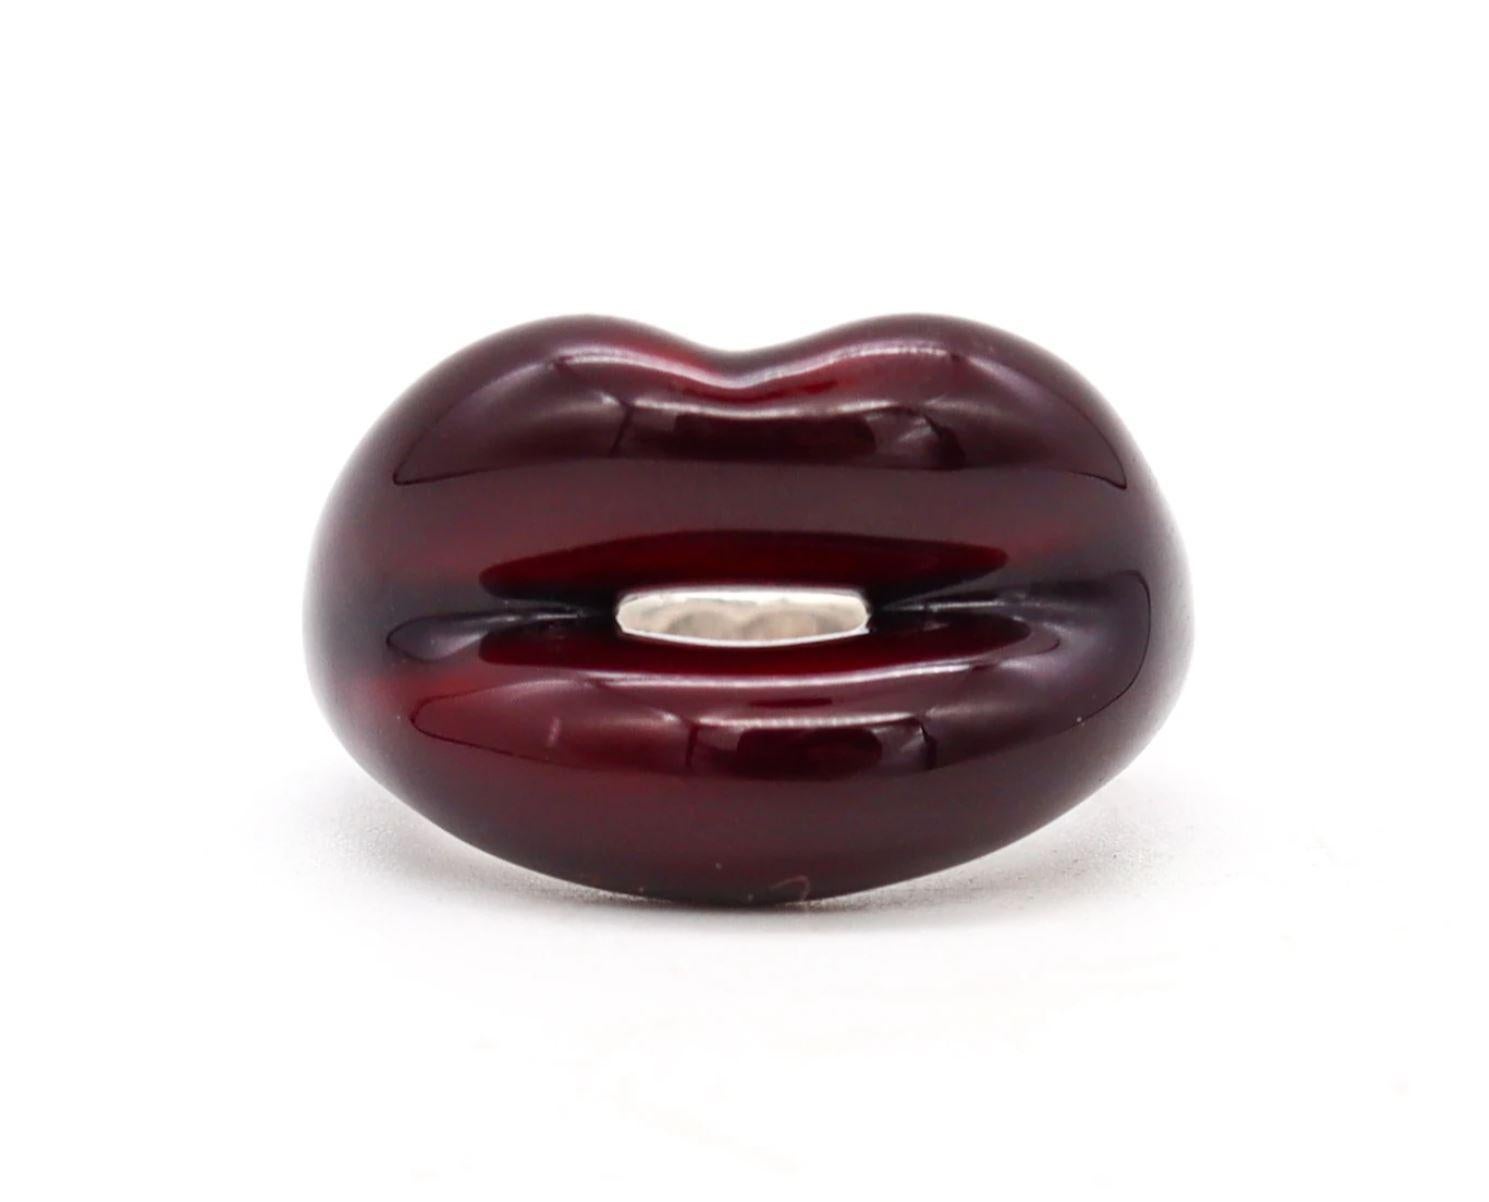 Hot-lips ring designed by Solange Azagury-Partridge.

The hot-lips rings by Solange Azagury-Partridge, were created only into limited editions. This youthful and fun ring was carefully crafted in solid .925./.999 sterling silver and embellished,